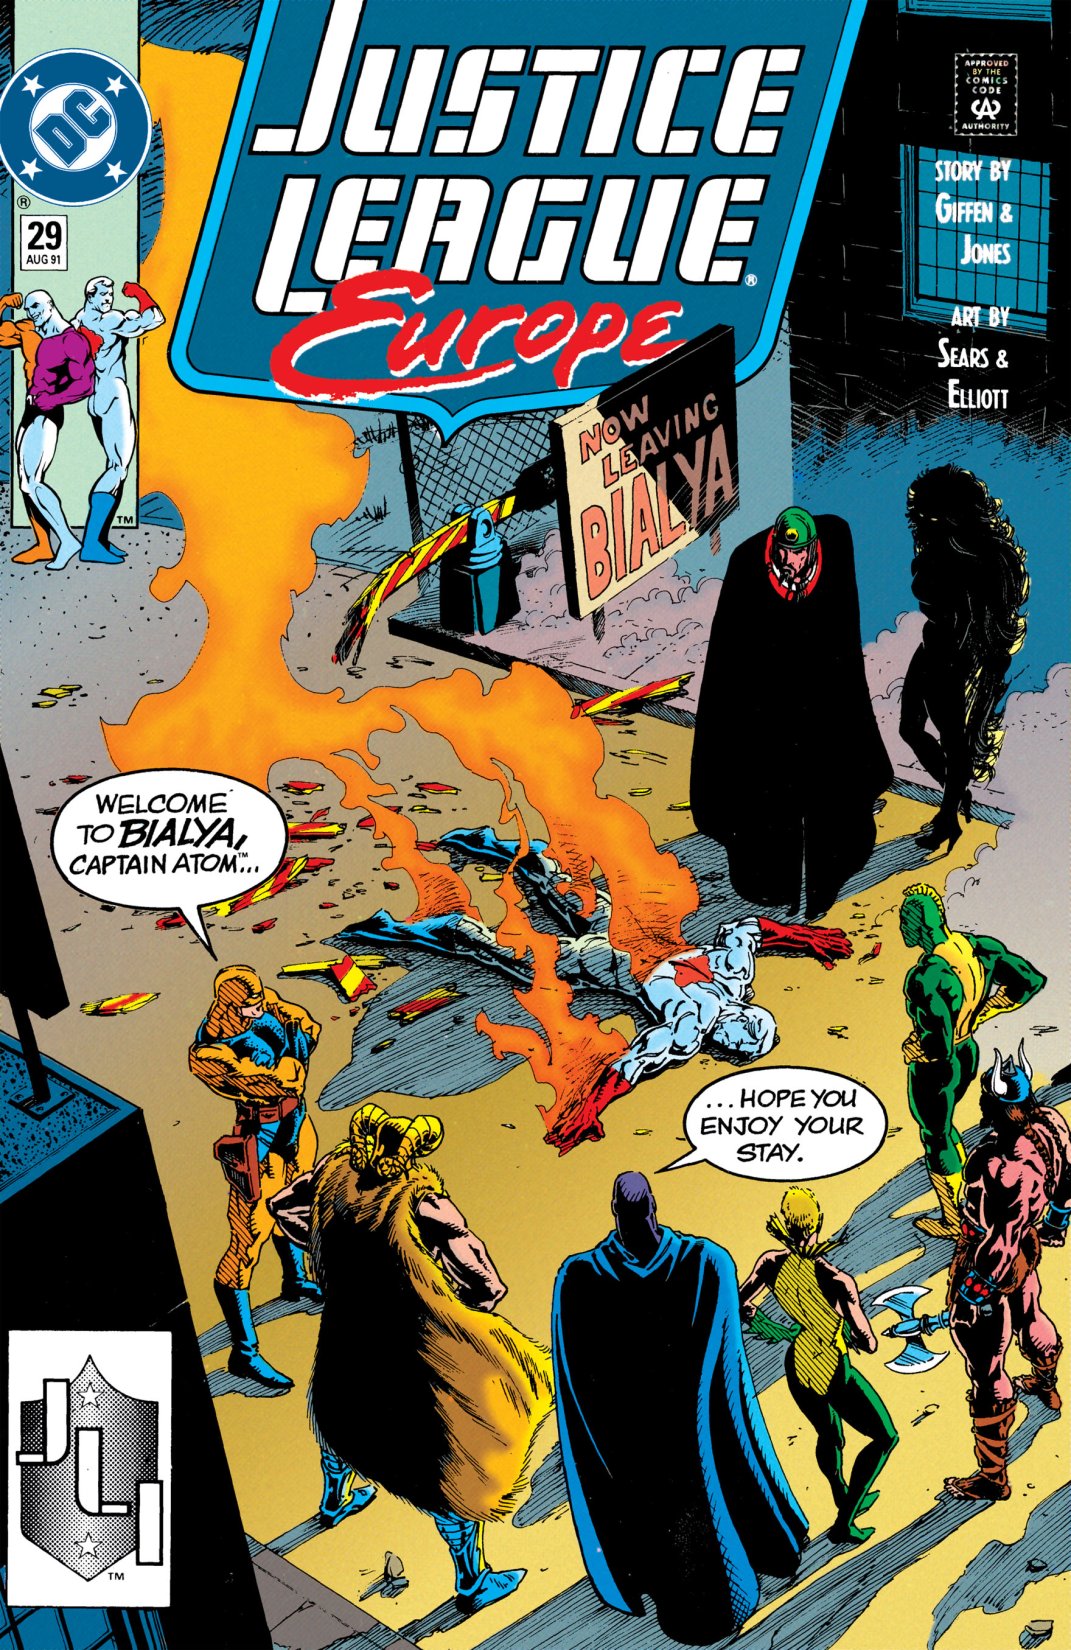 Read online Justice League Europe comic -  Issue #29 - 1